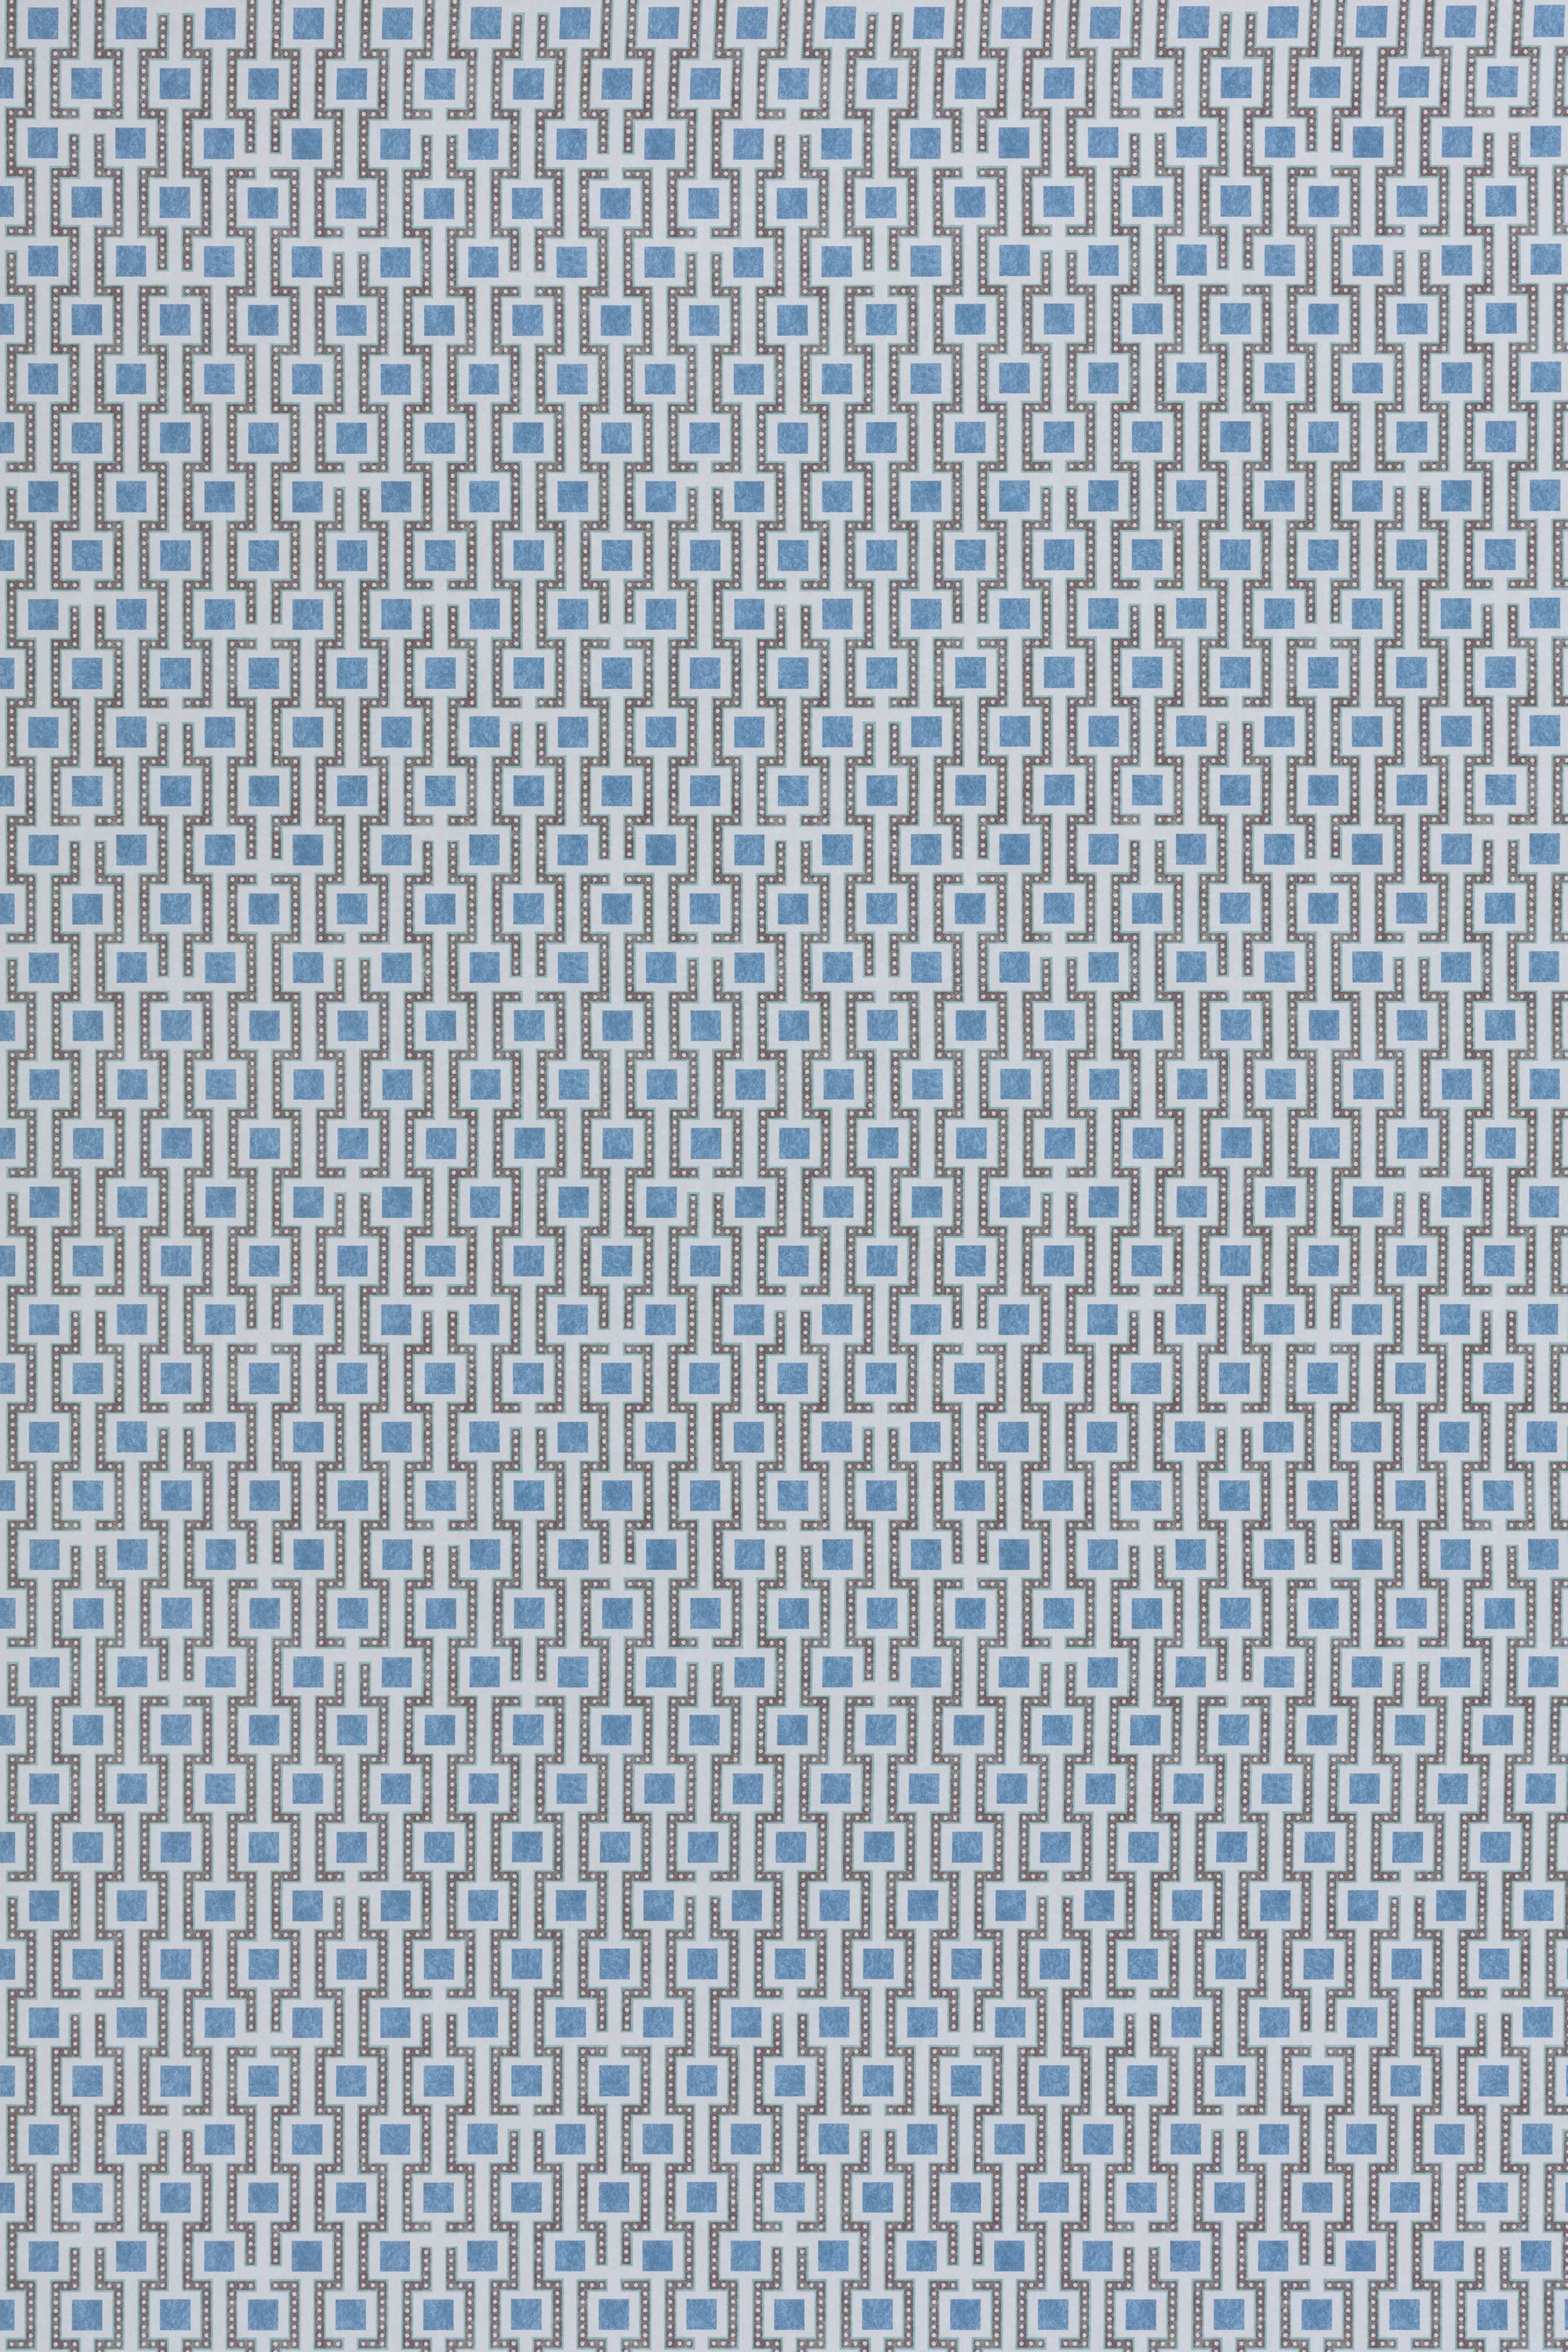 Wallpaper panel in a geometric grid print in shades of blue and gray.